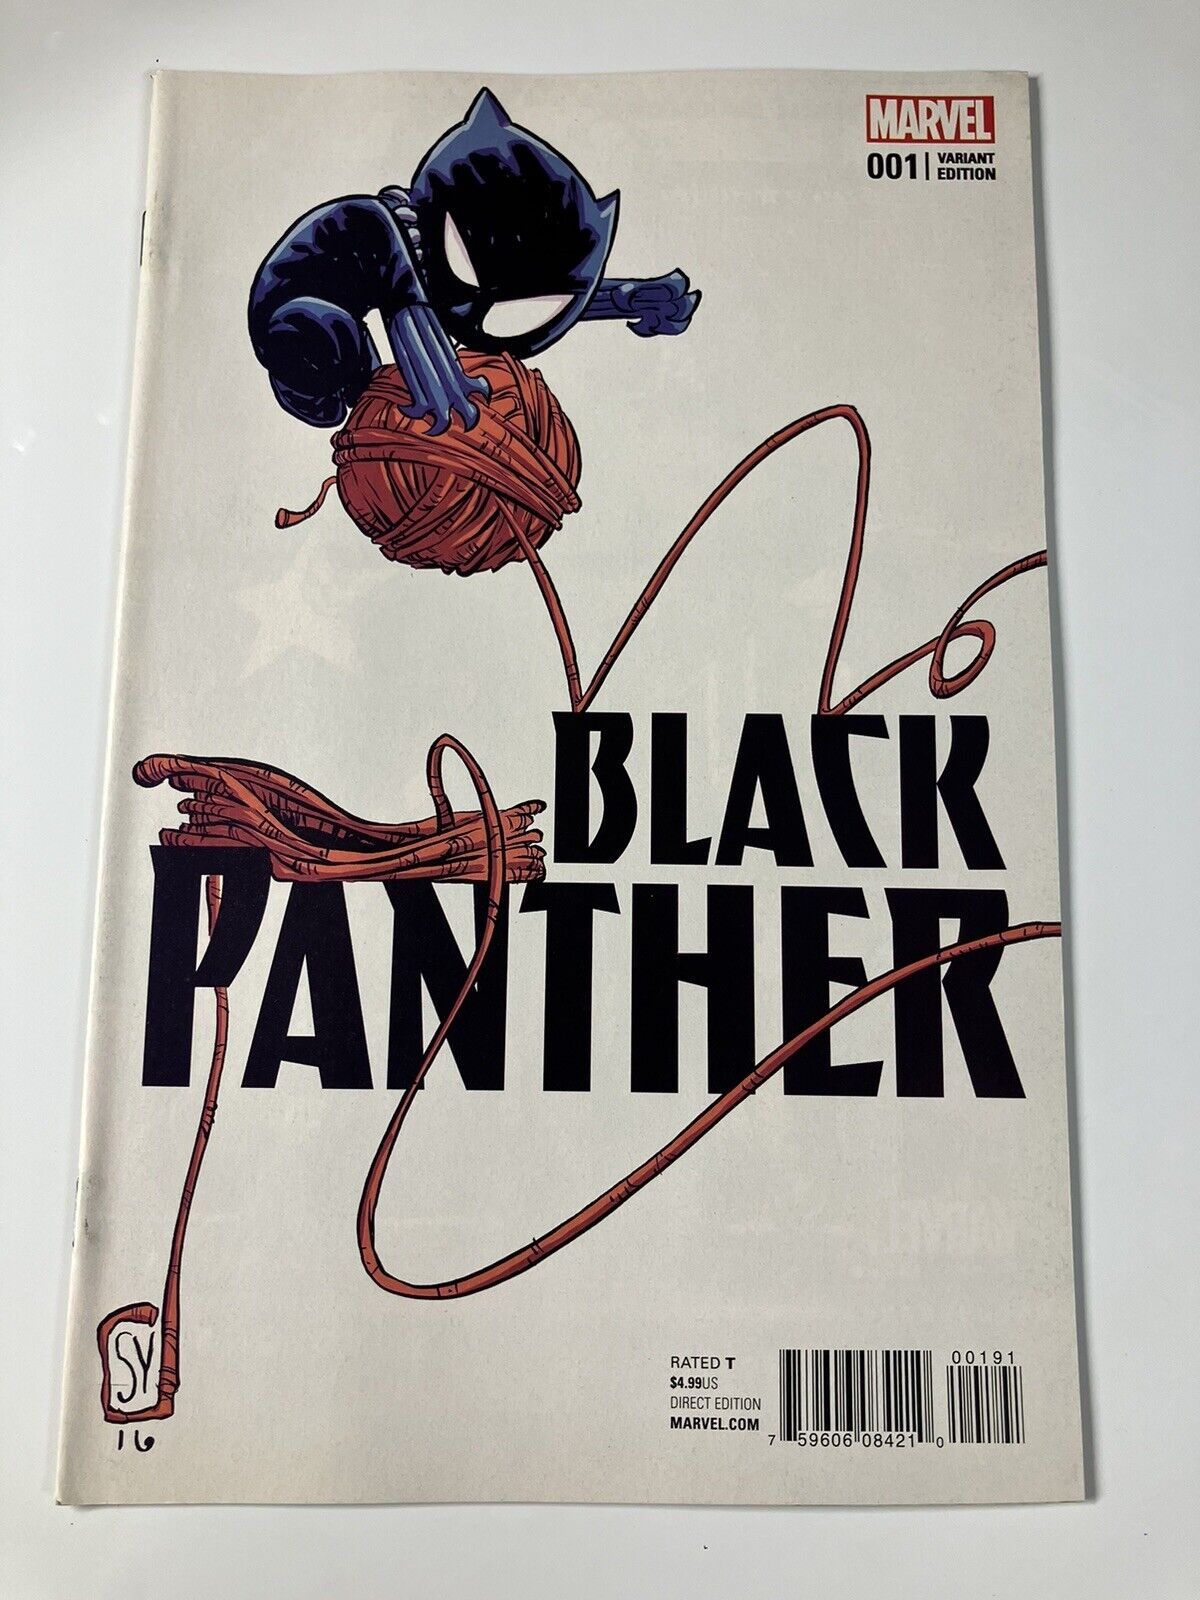 💥BLACK PANTHER #1 (2016) MARVEL COMICS - SKOTTIE YOUNG ART - RARE COVER - VF+